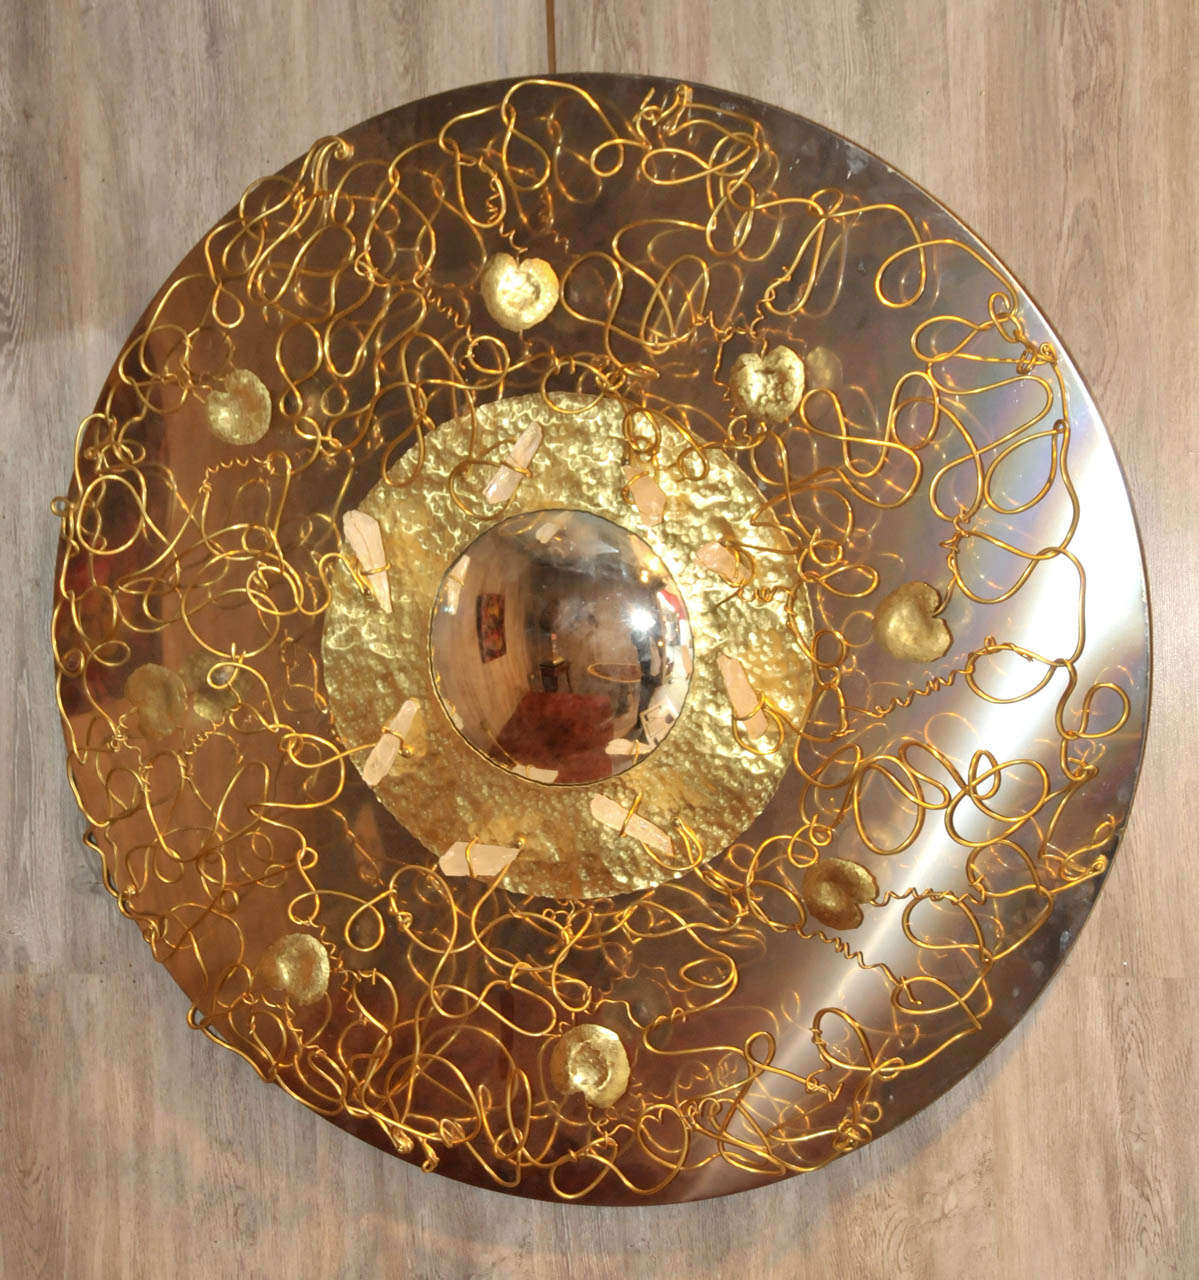 1990's circular mirror. Gilded brass and convex mirror. Rock cristal and wood structure. Good condition. Normal wear consistent with age and use.